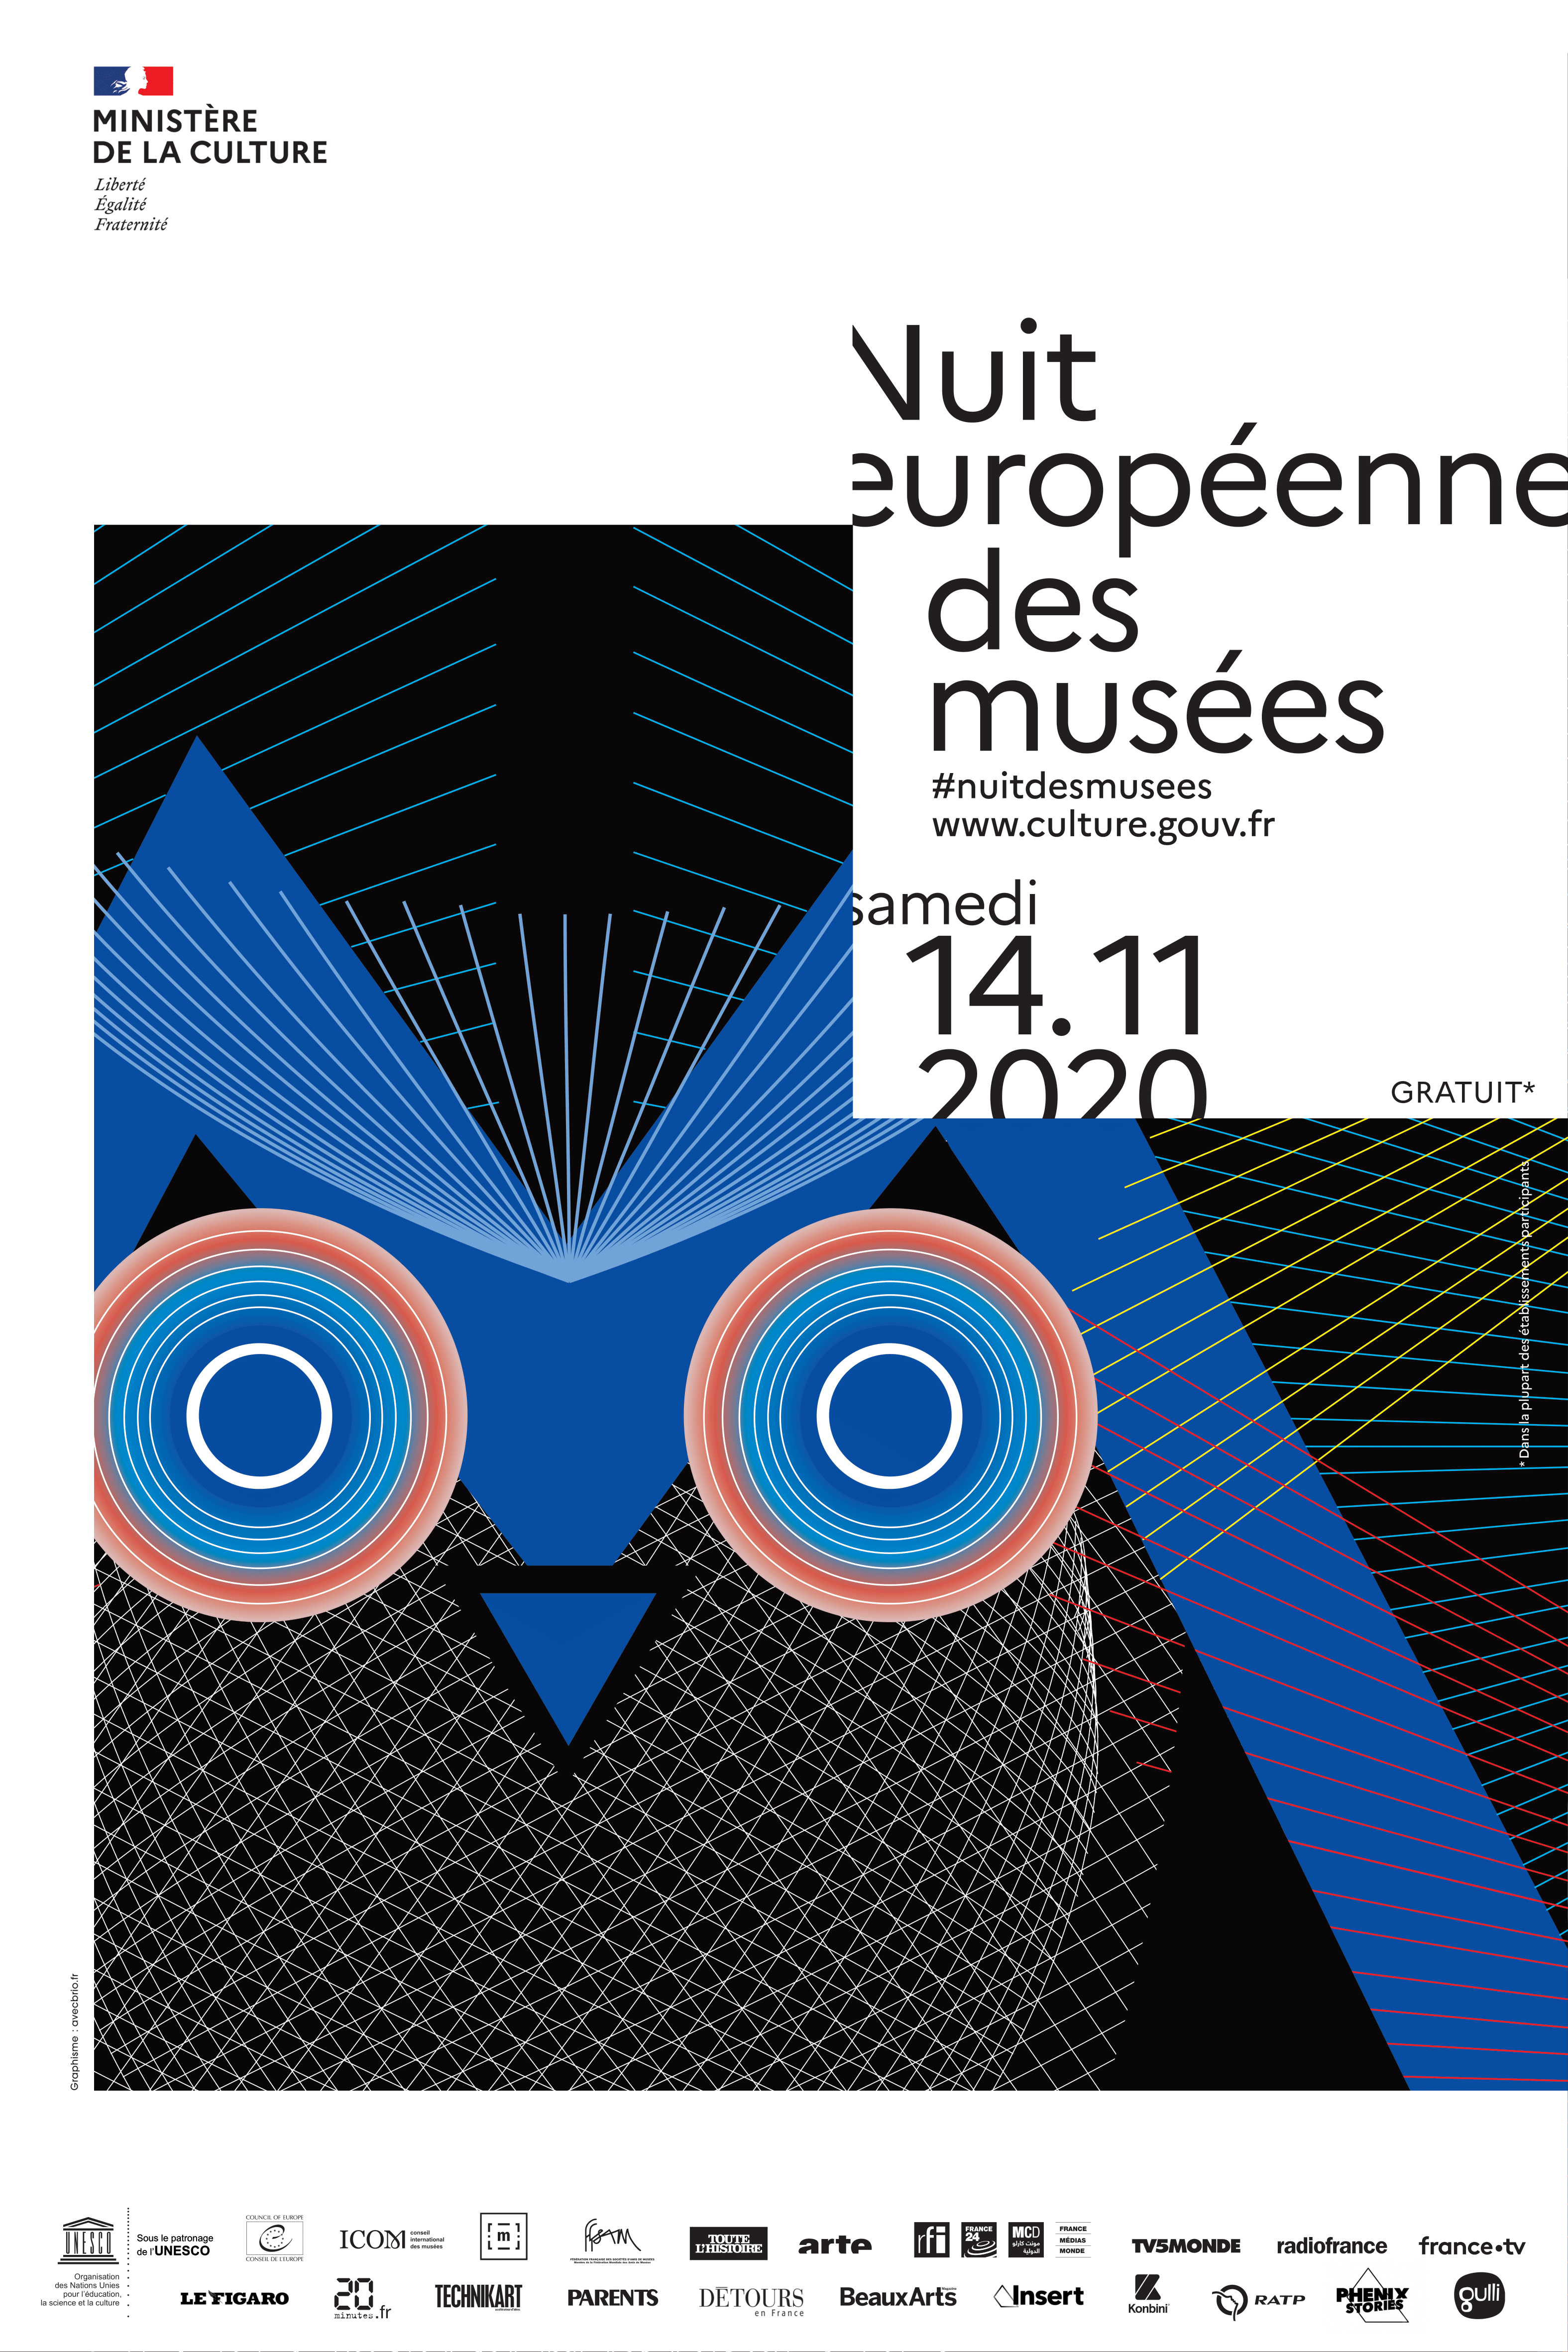 The European night of museums